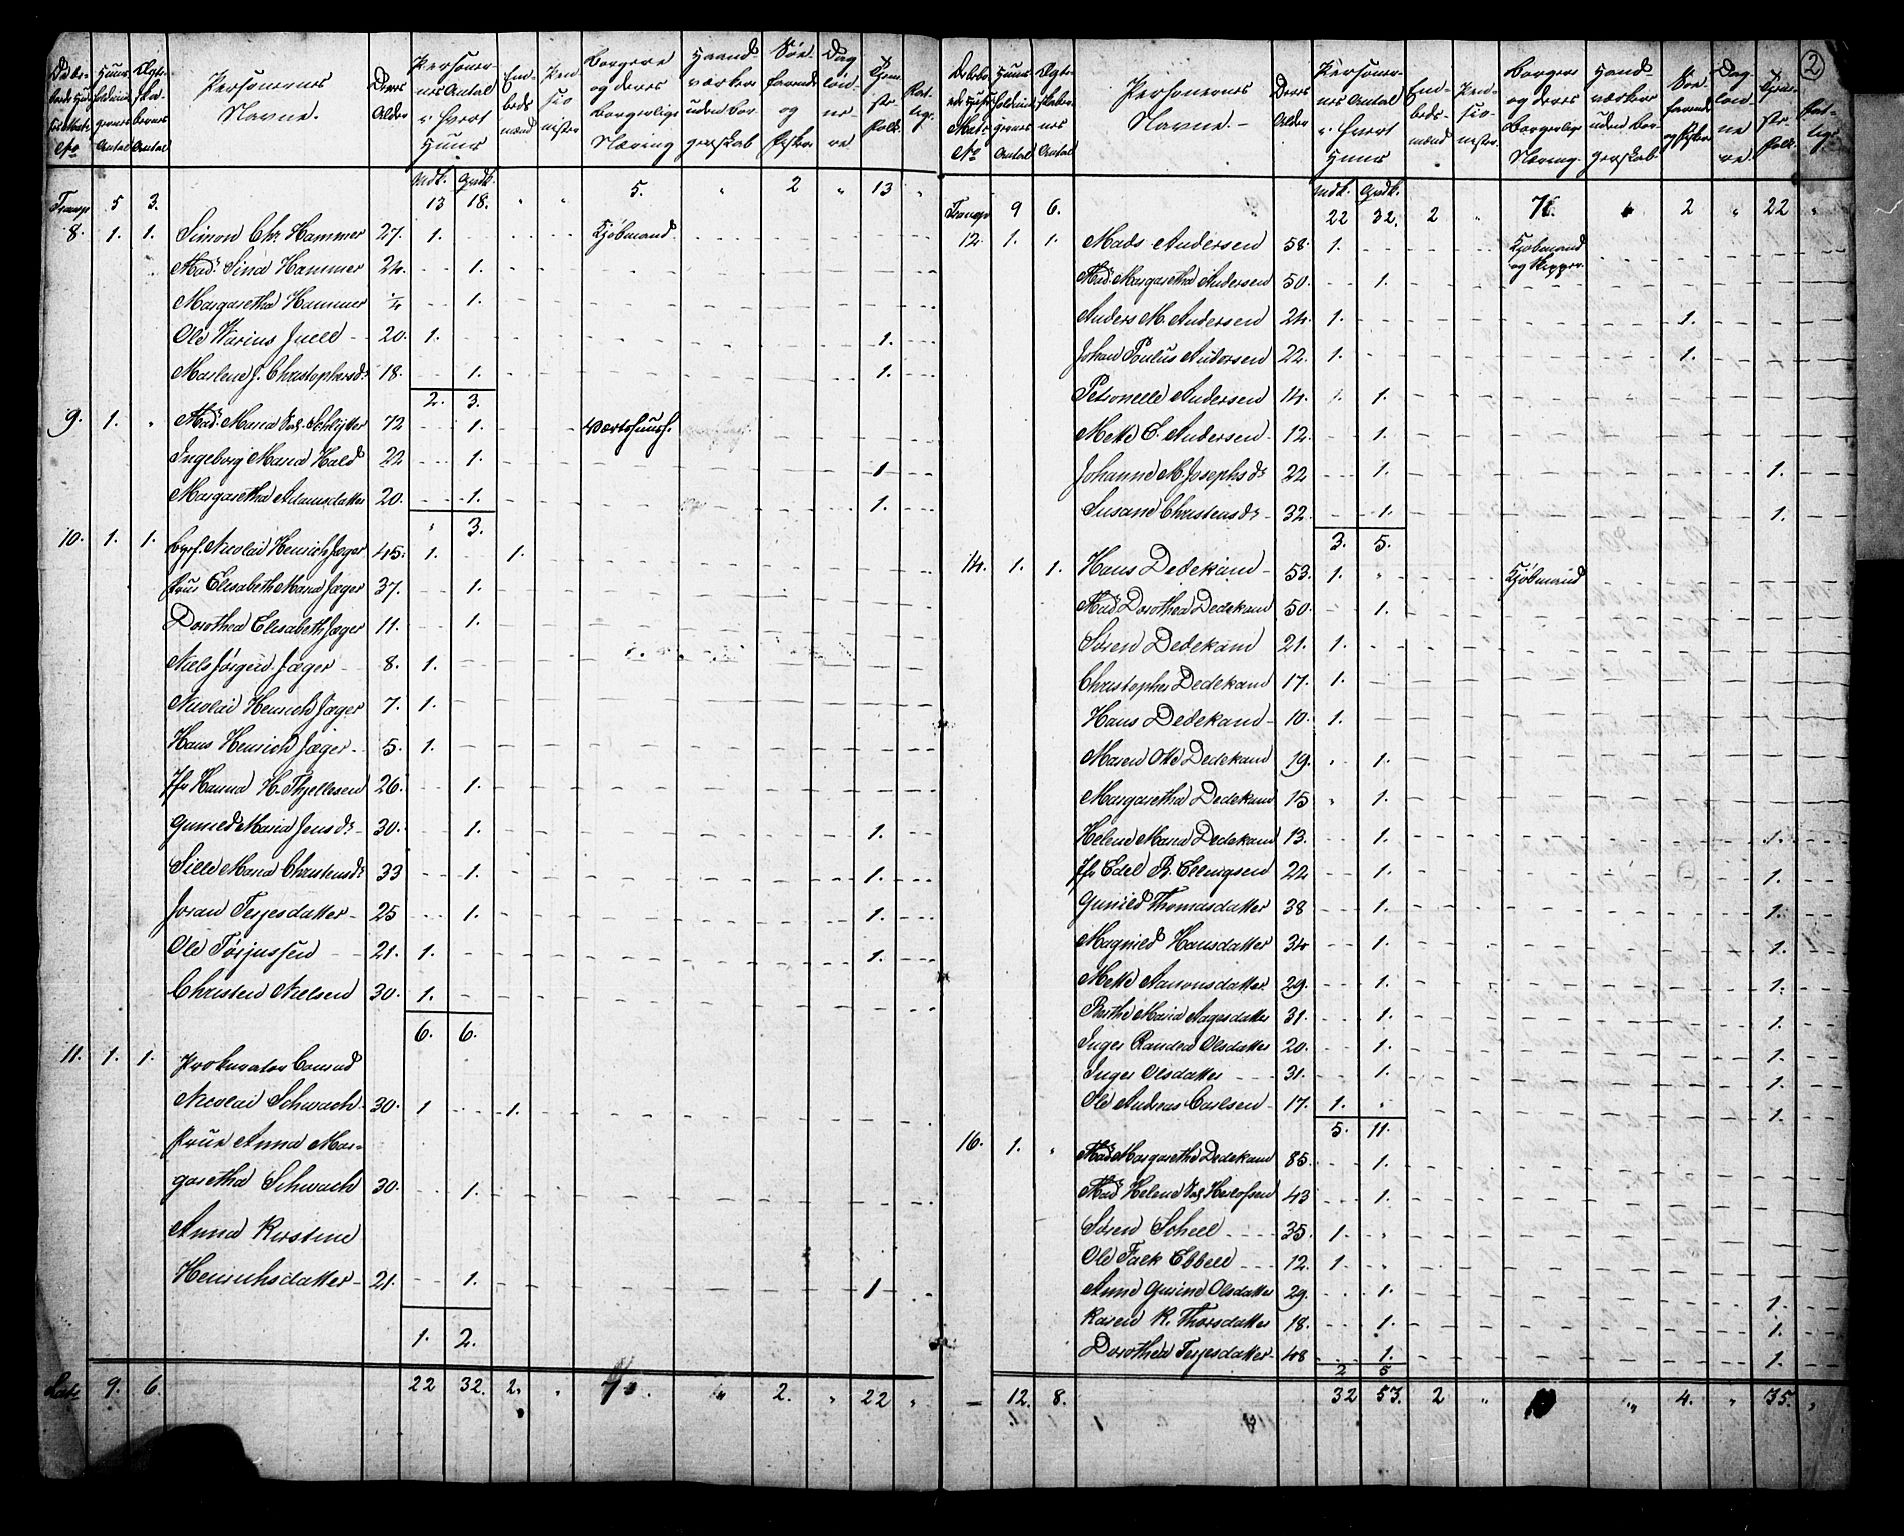 , Census 1825 for Arendal, 1825, p. 3